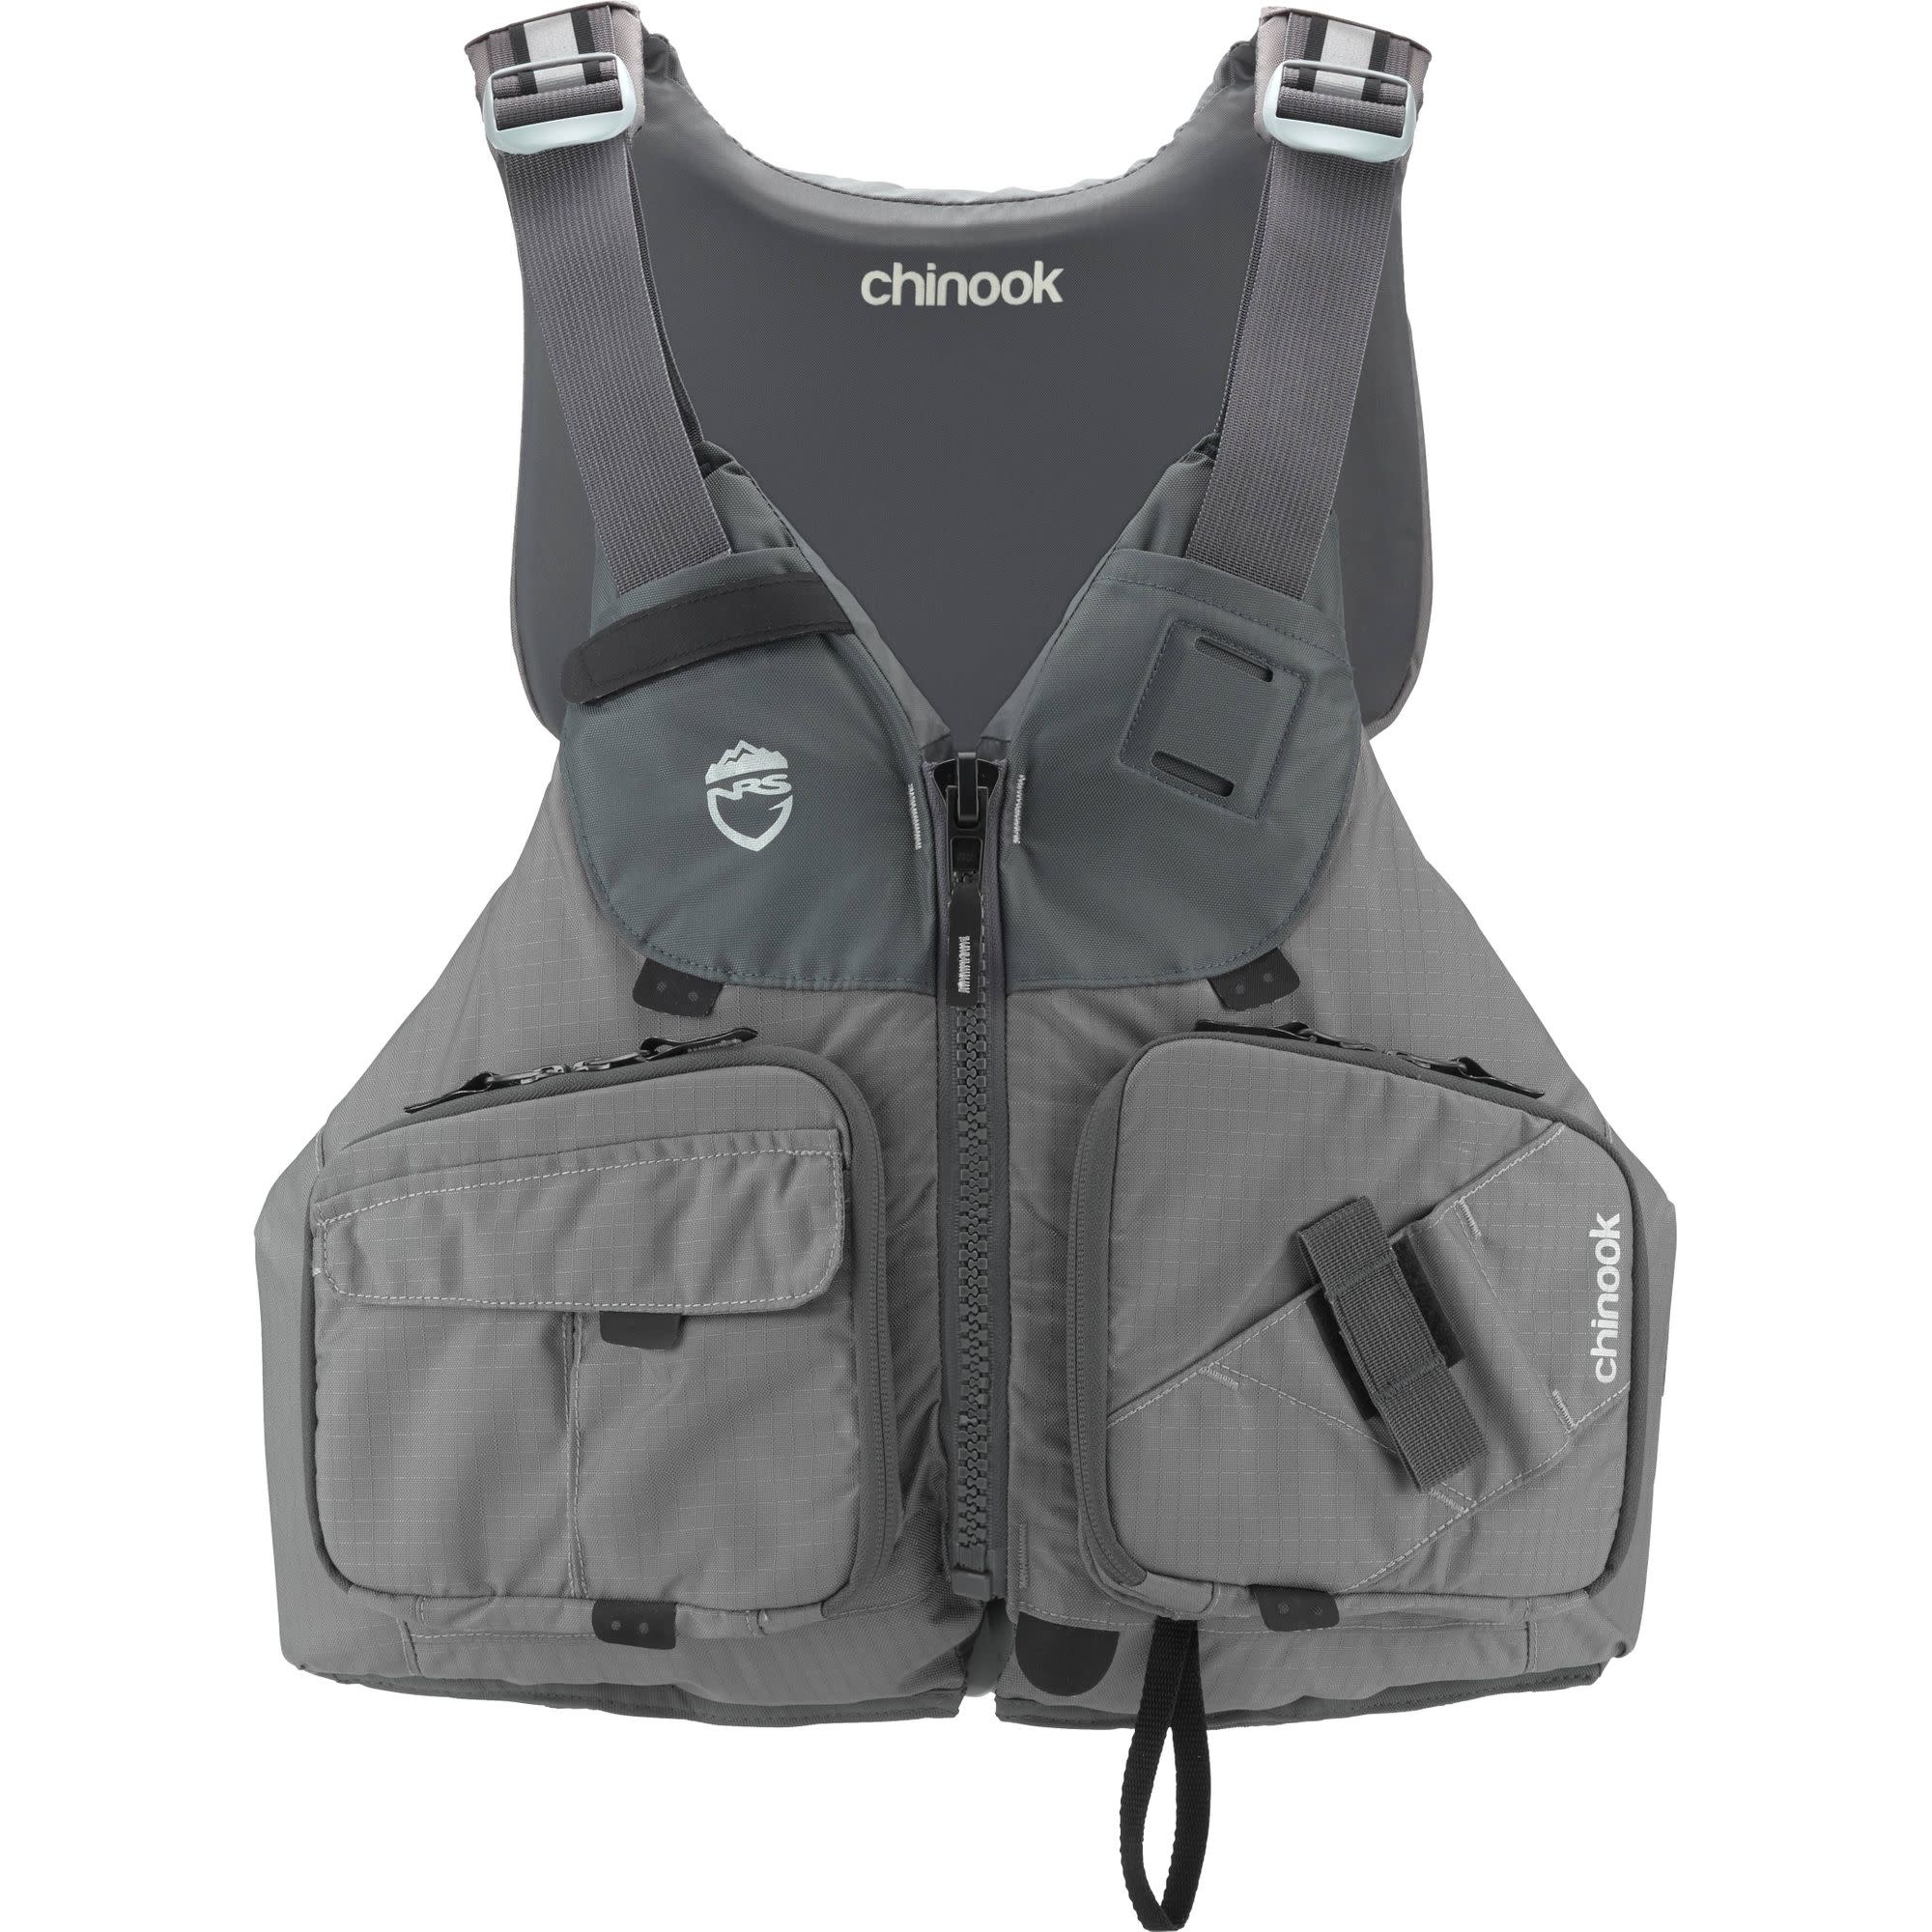 Fishing Life Vests, PFDs and Outerwear